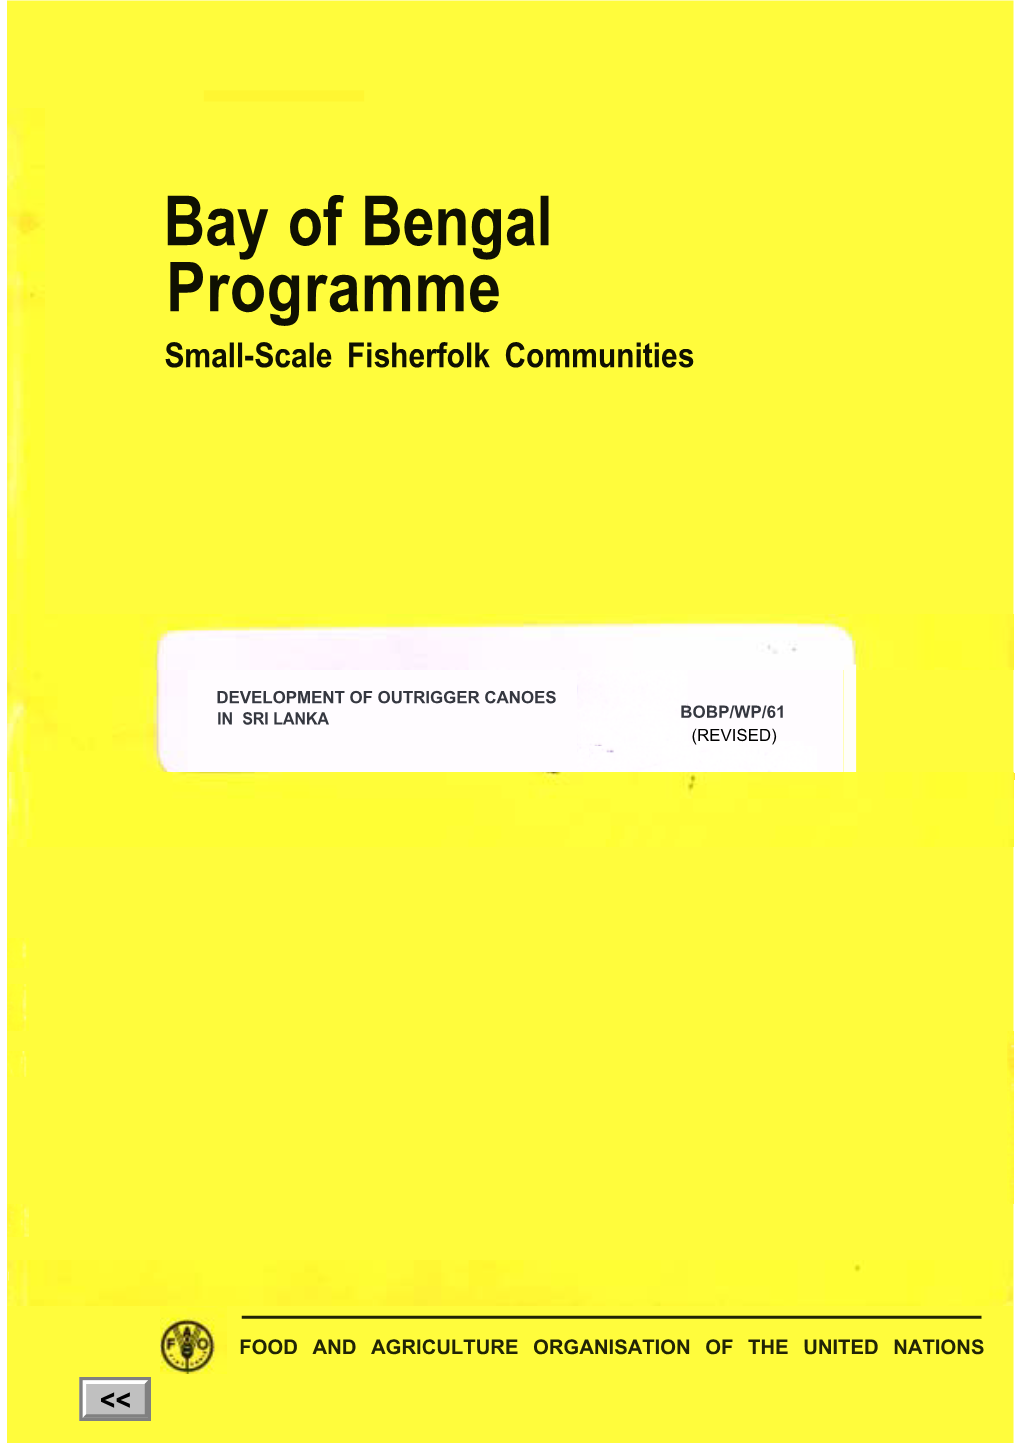 Bay of Bengal Programme Small-Scale Fisherfolk Communities